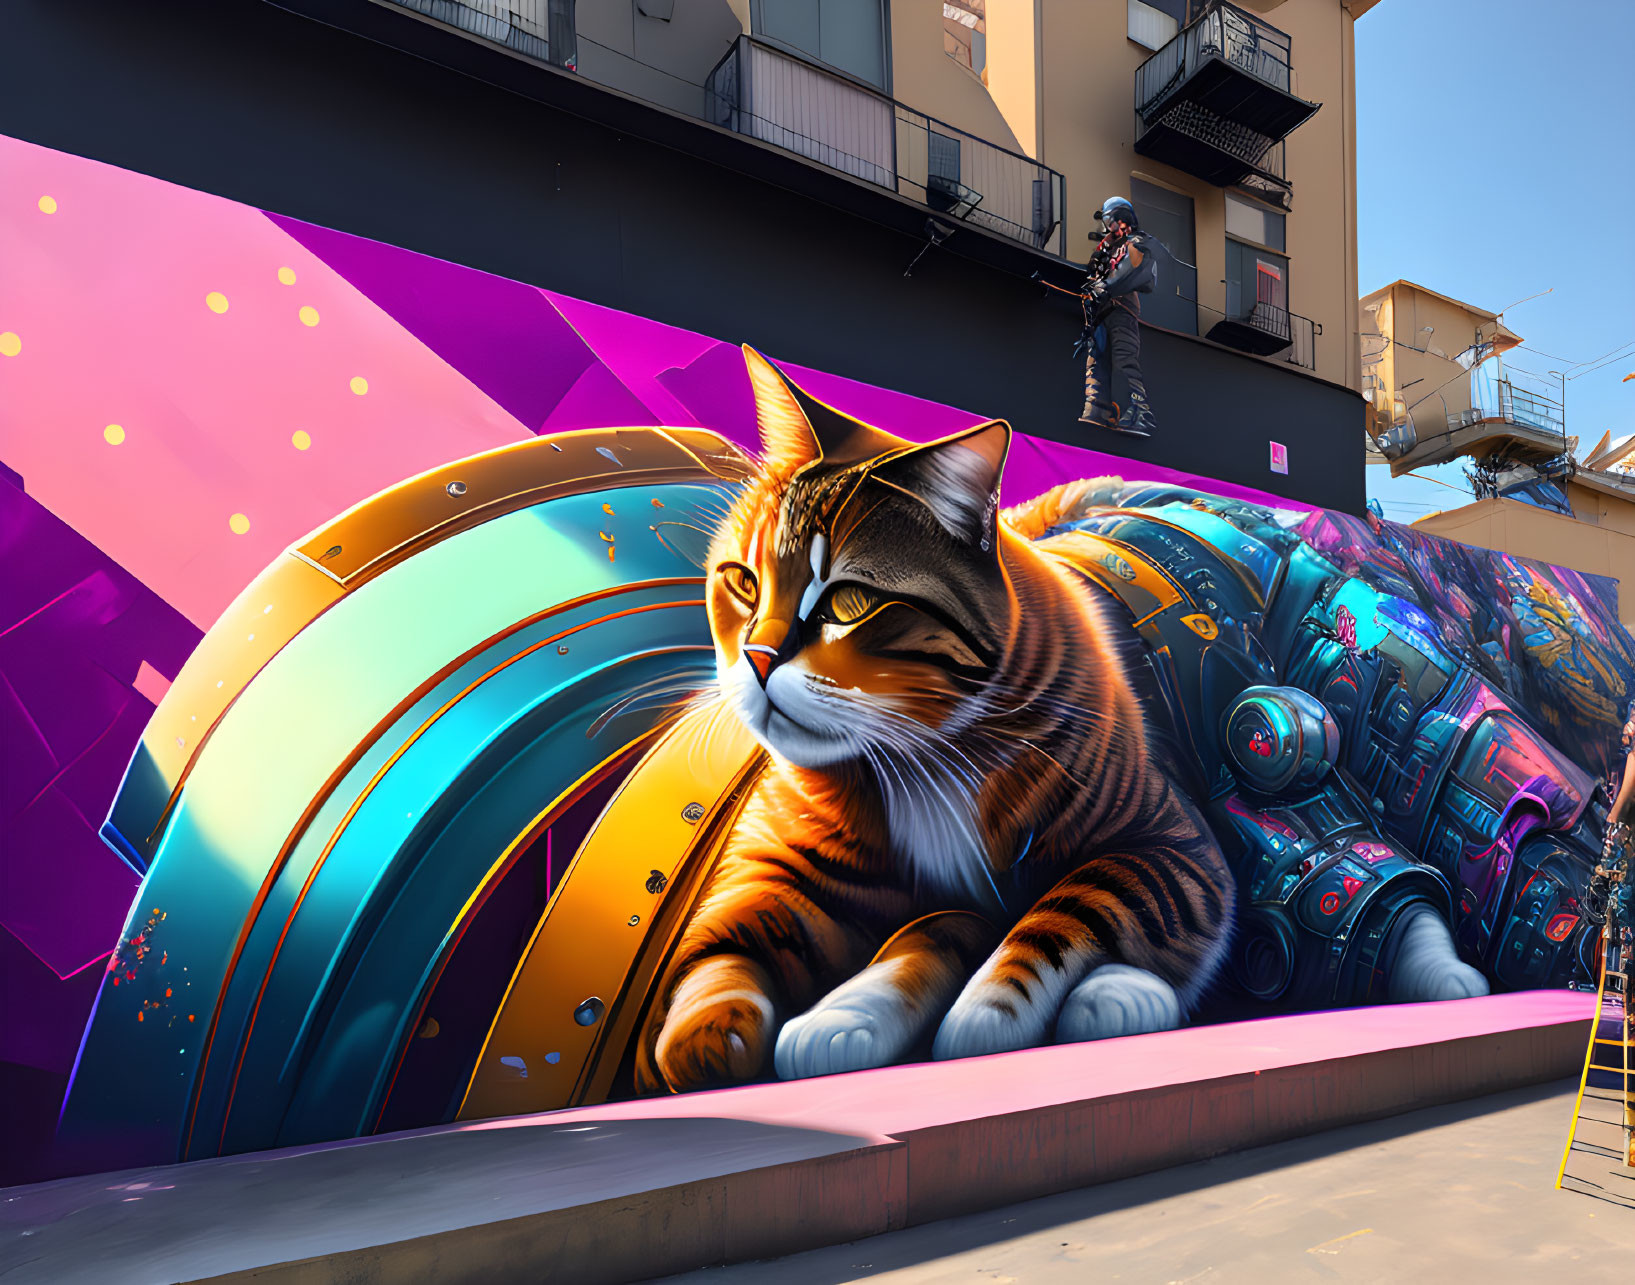 Colorful mural featuring oversized tabby cat and mechanical elements with person on ladder